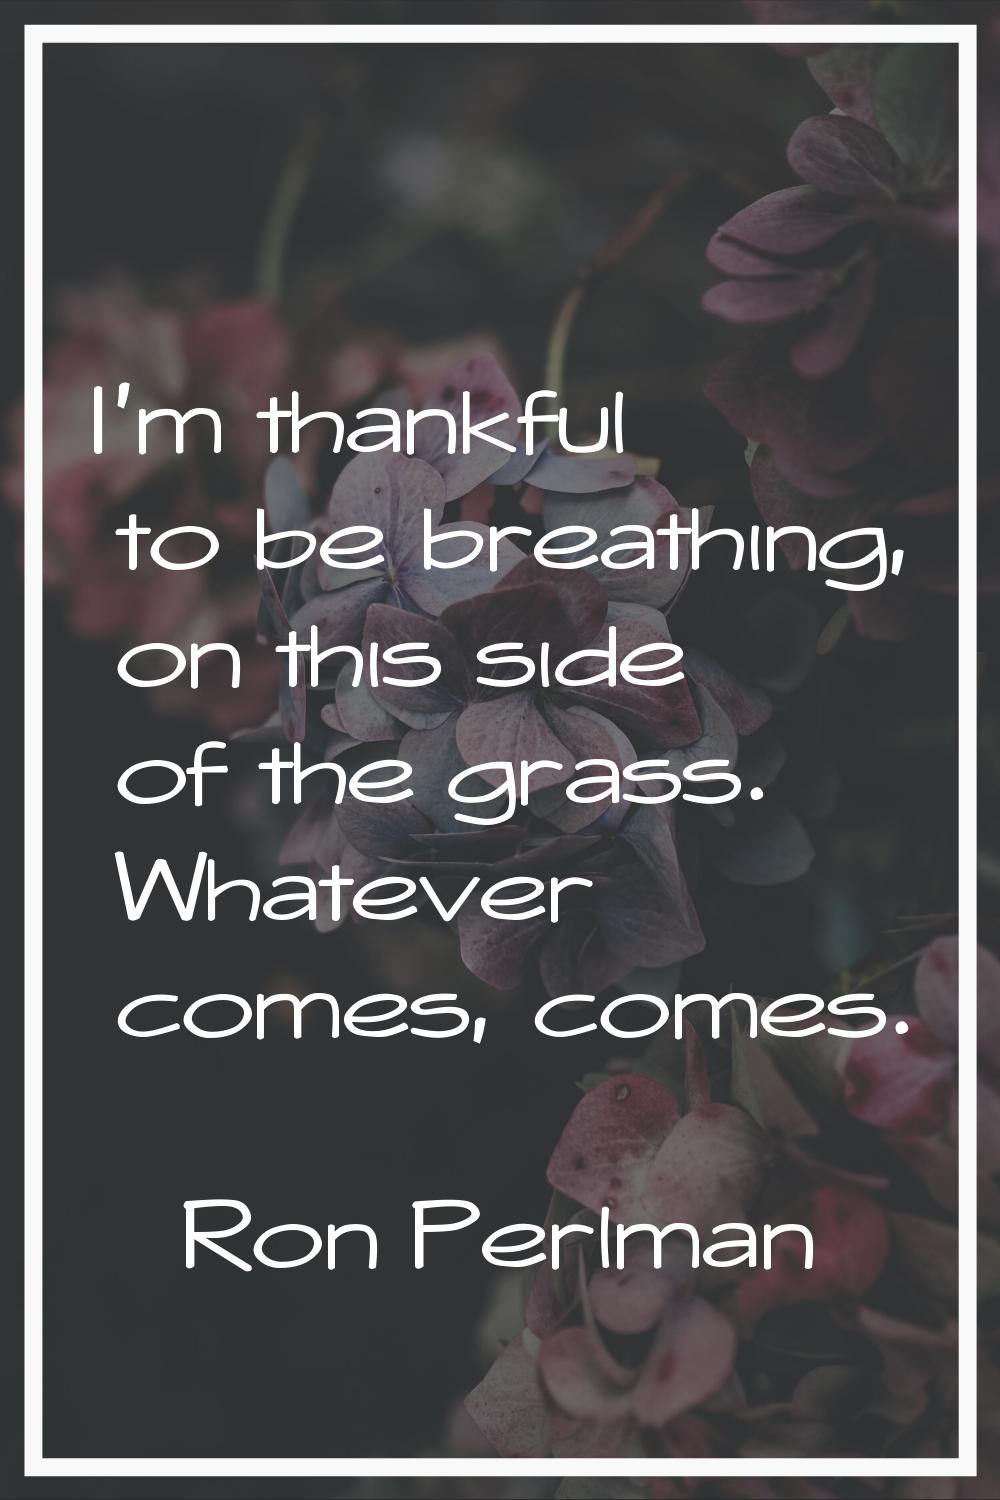 I'm thankful to be breathing, on this side of the grass. Whatever comes, comes.